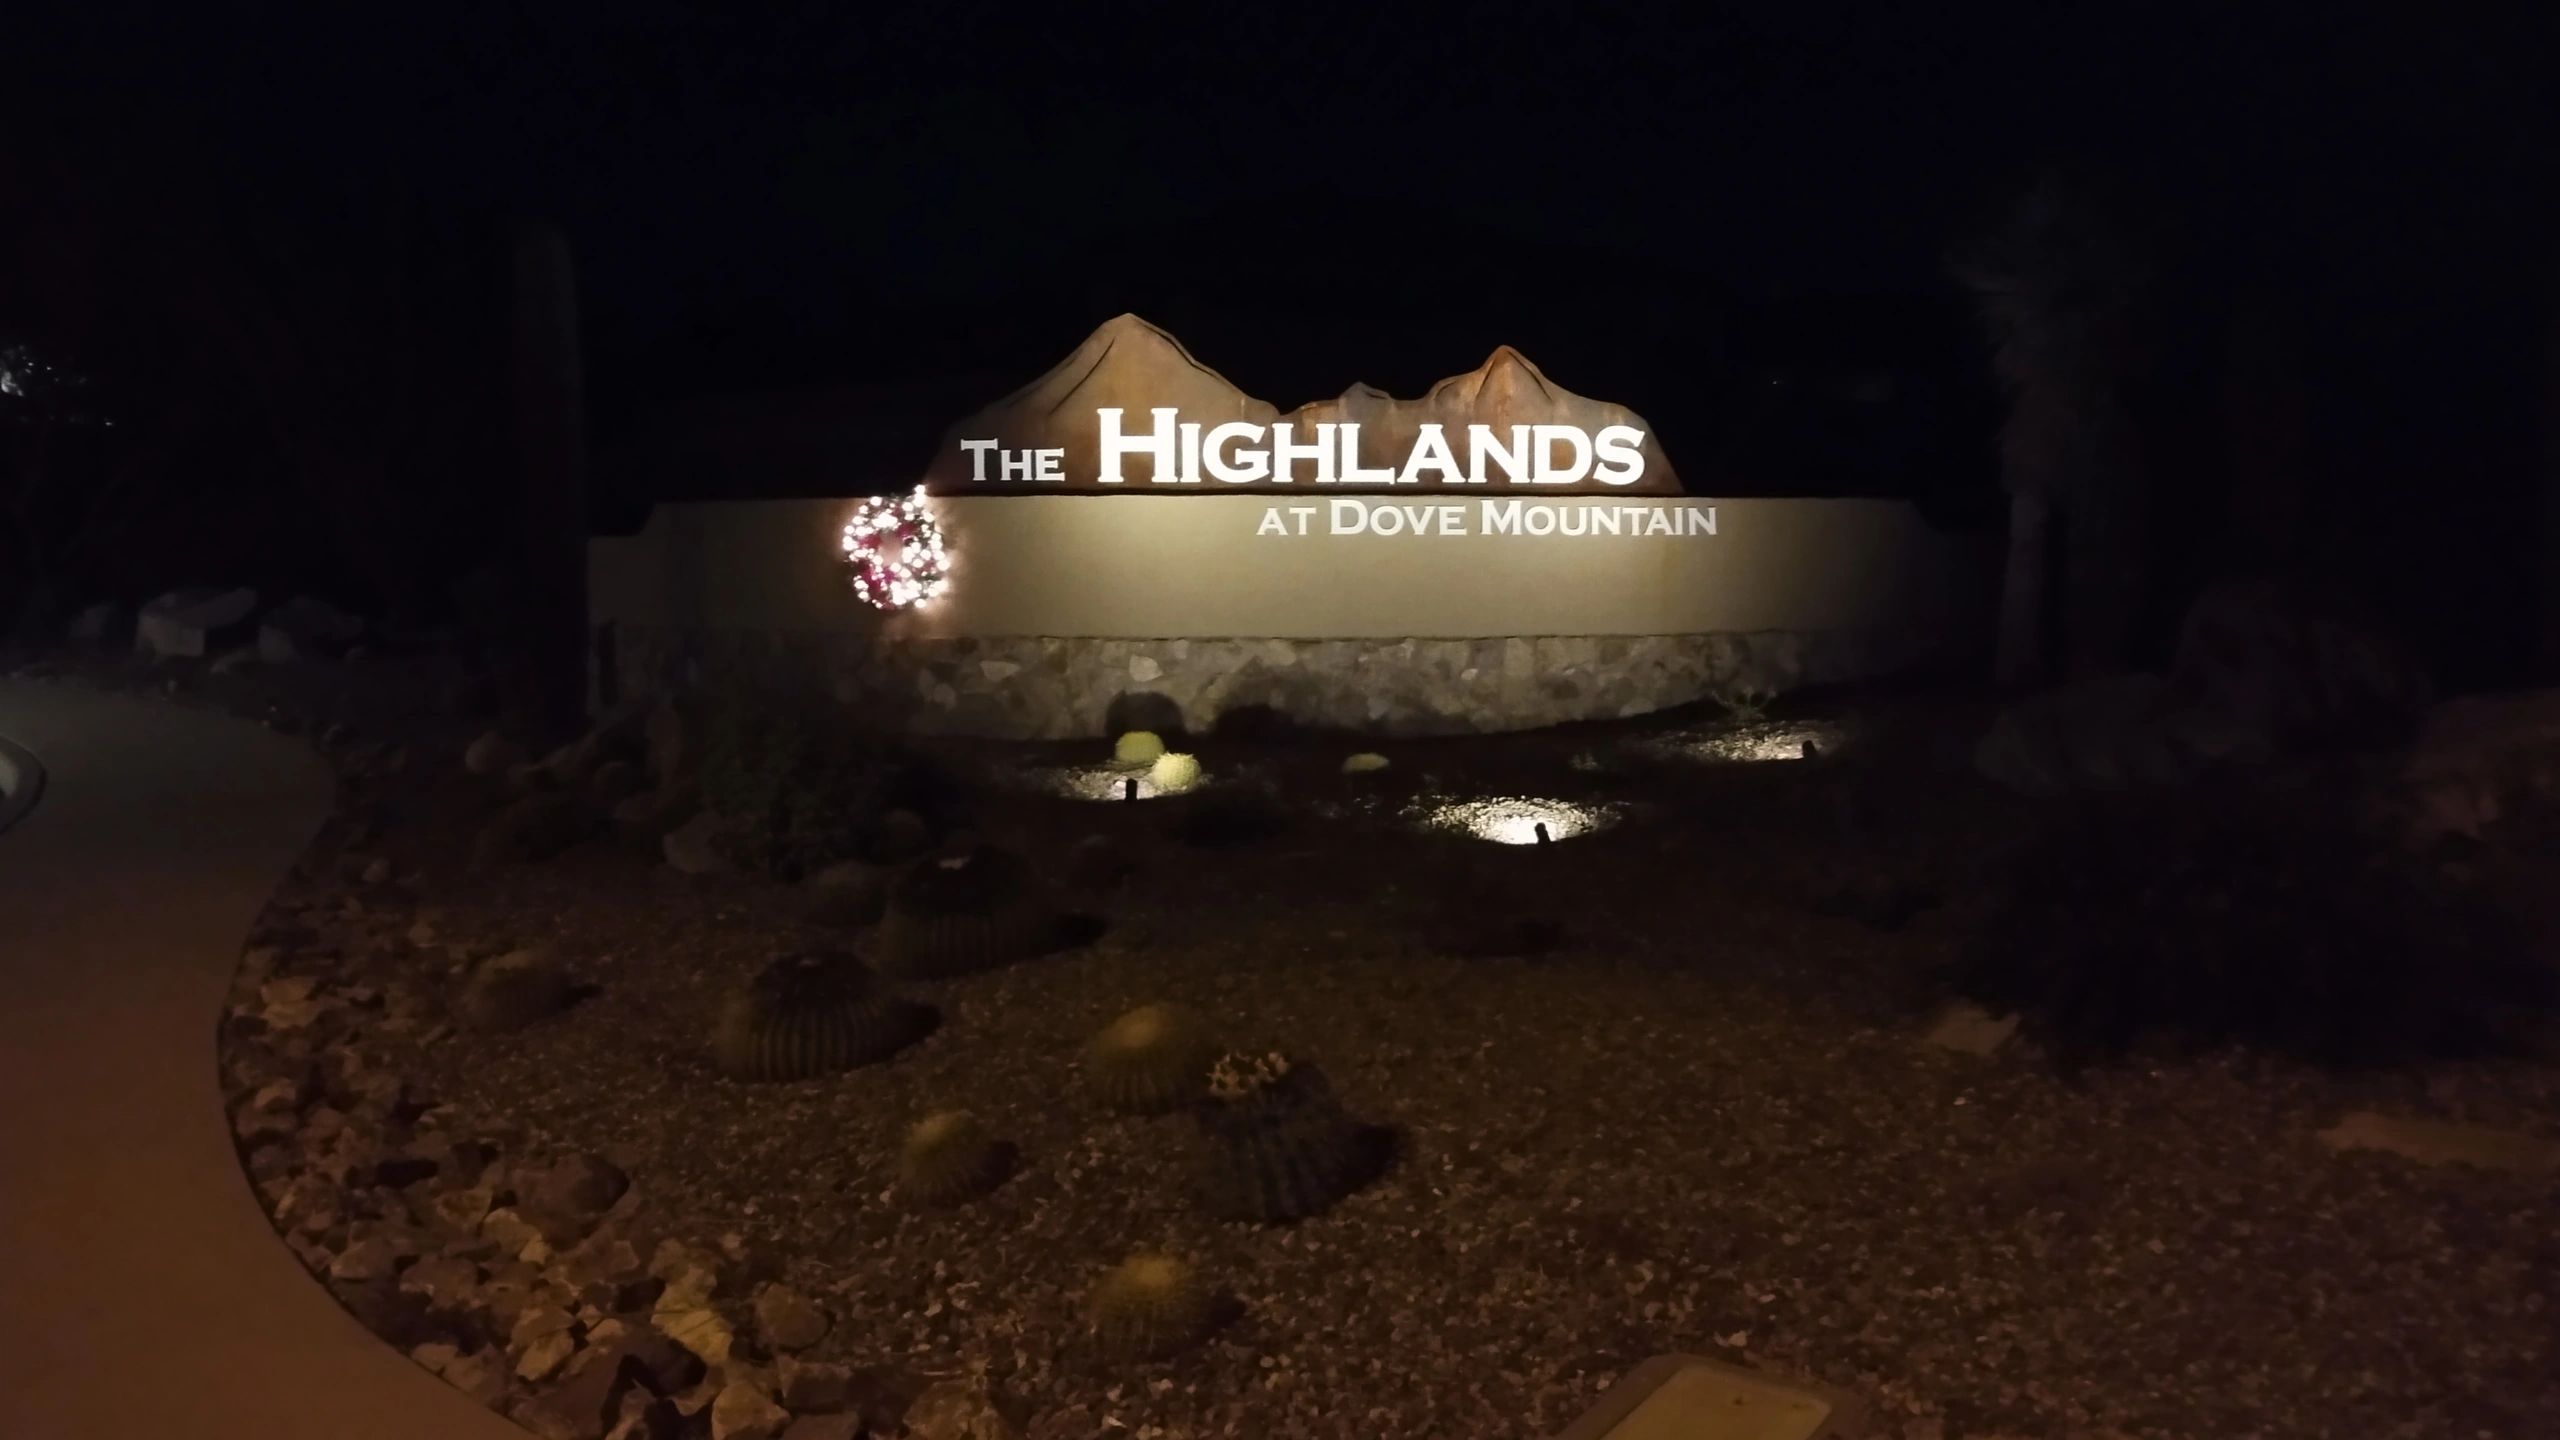 Dove mountain highlands entrance on the way to repeat client.